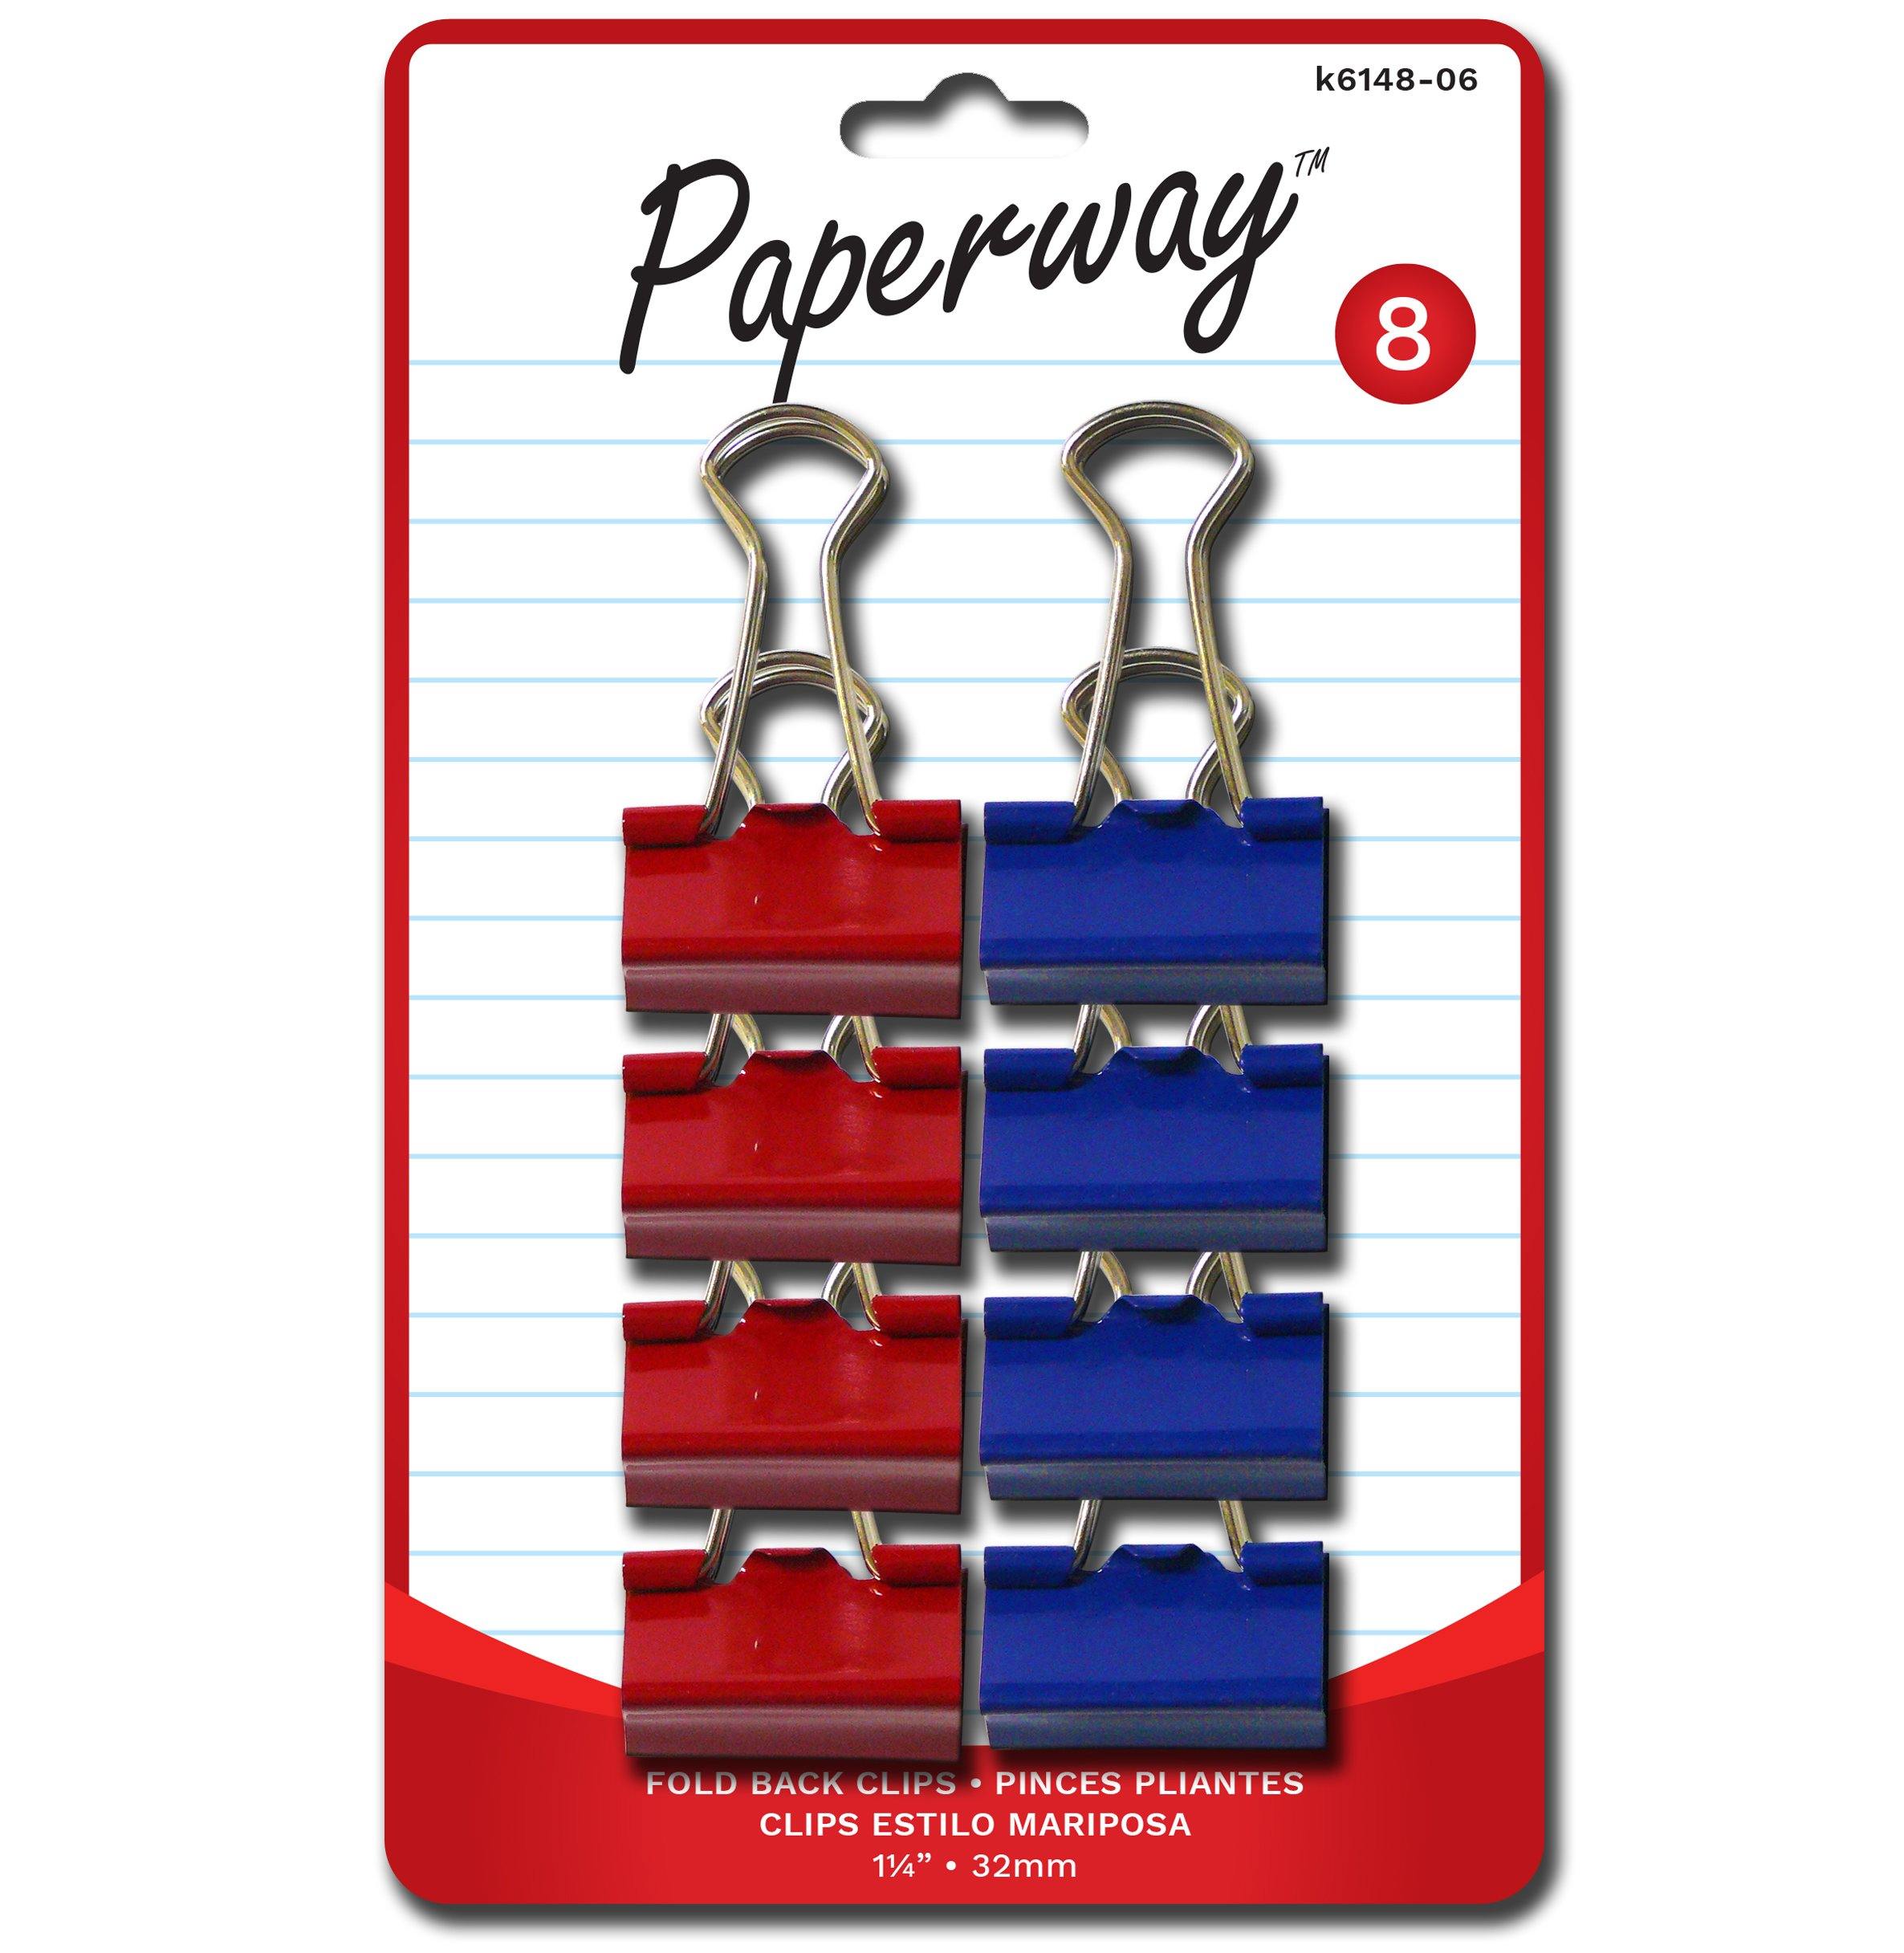 8 Red And Blue Fold Back Clips 1-1.4" - Dollar Max Depot